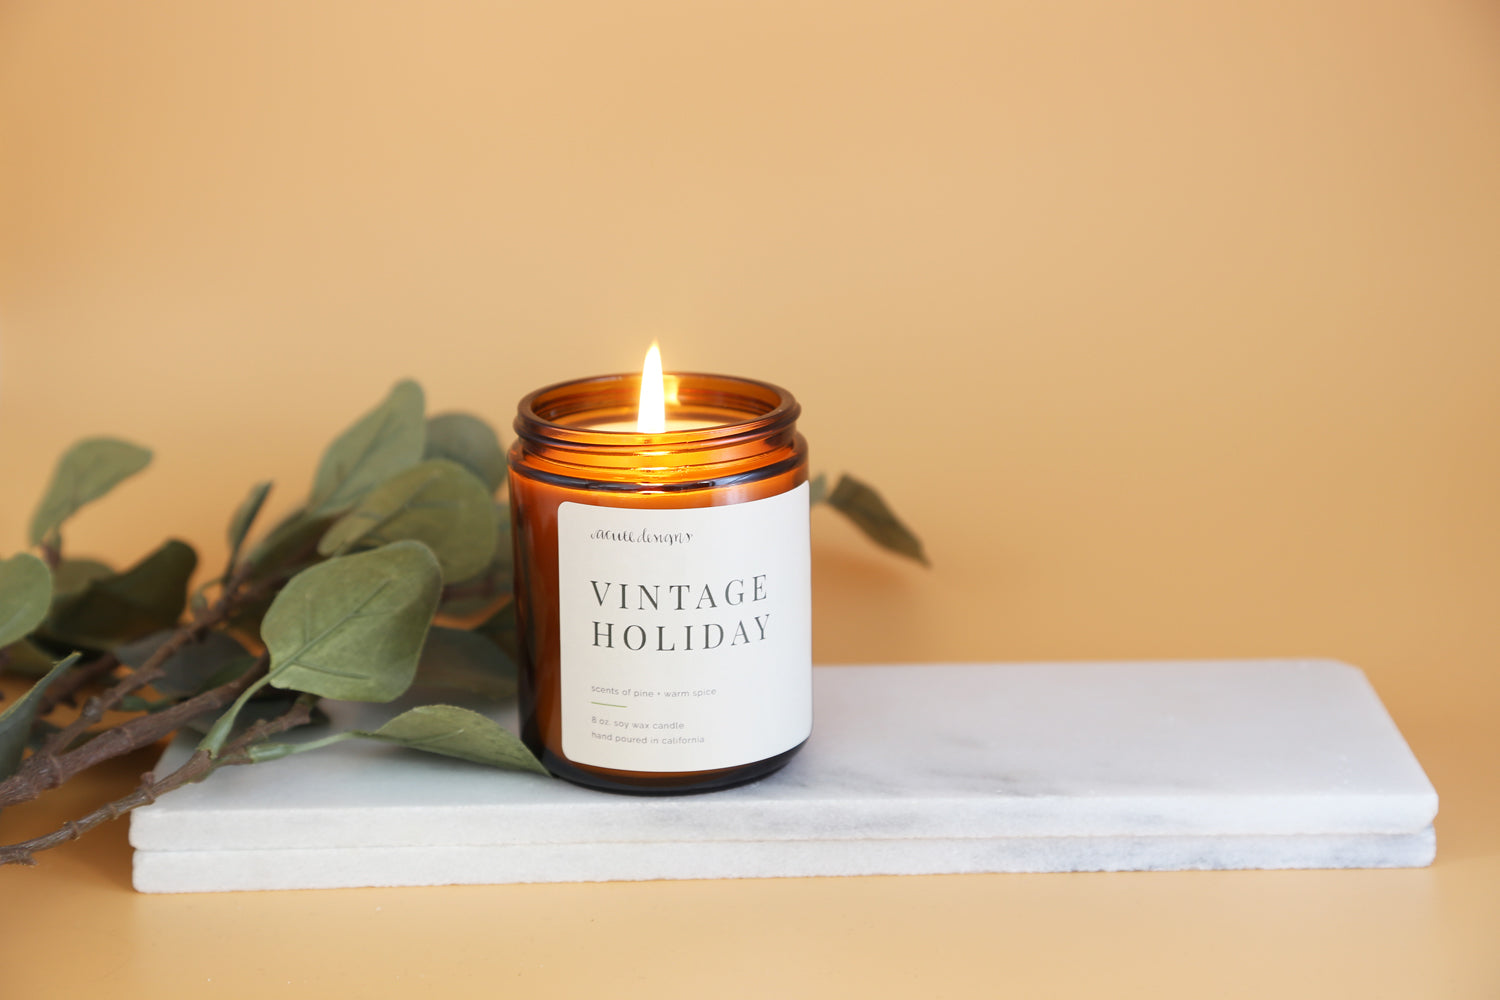 Vintage Holiday Candle - Scented Holiday Candle, Scents of pine and warm spice